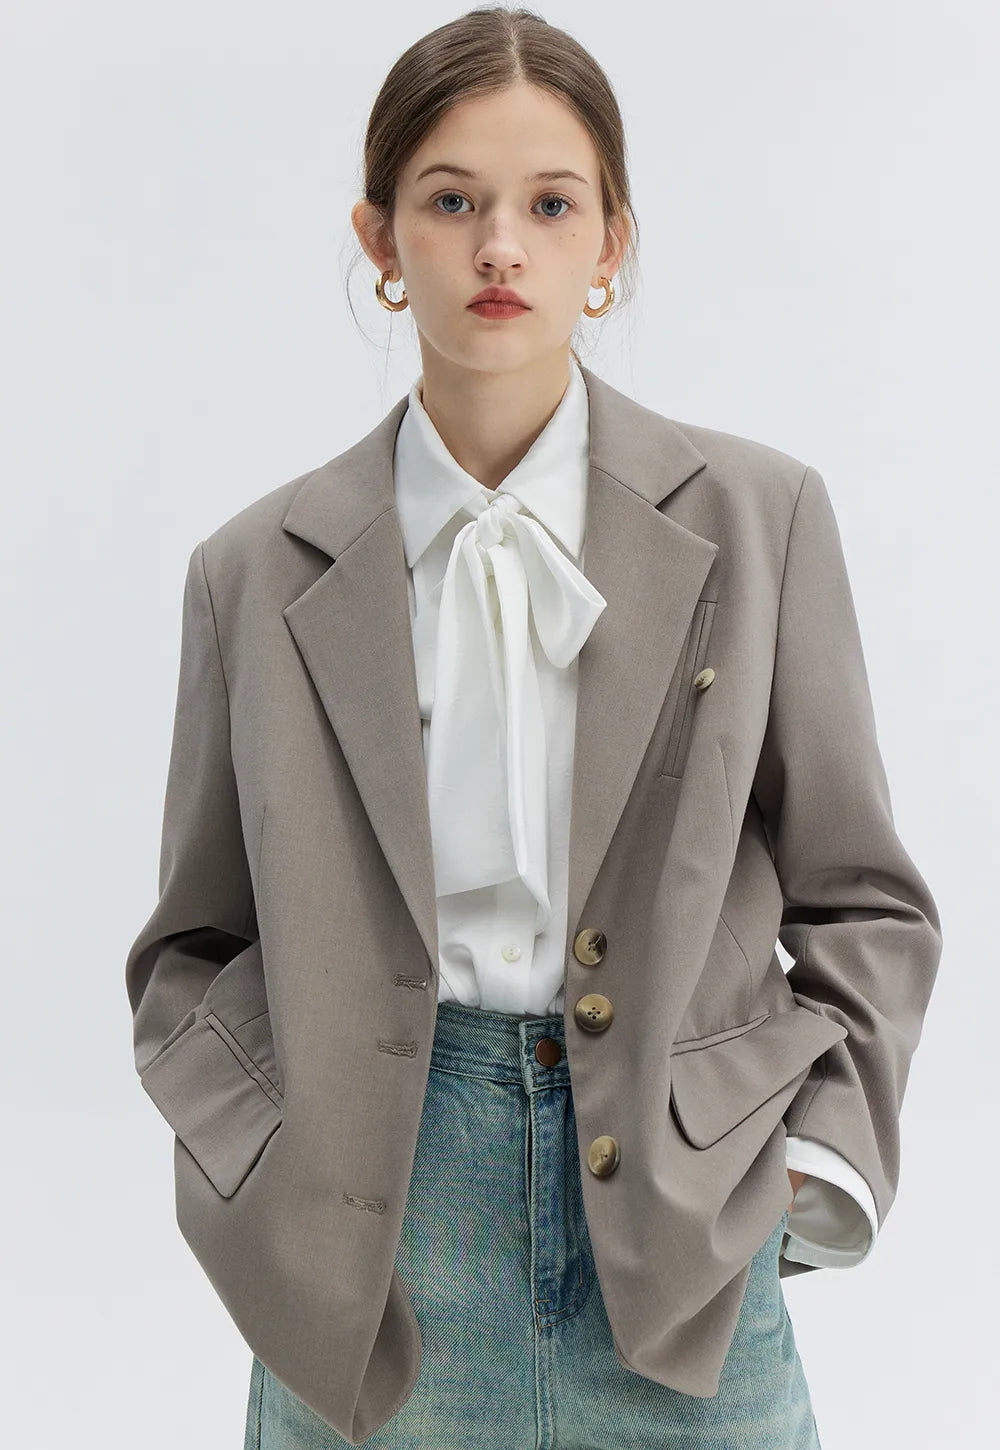 Women's Oversized Double-Breasted Blazer with Wide Lapels